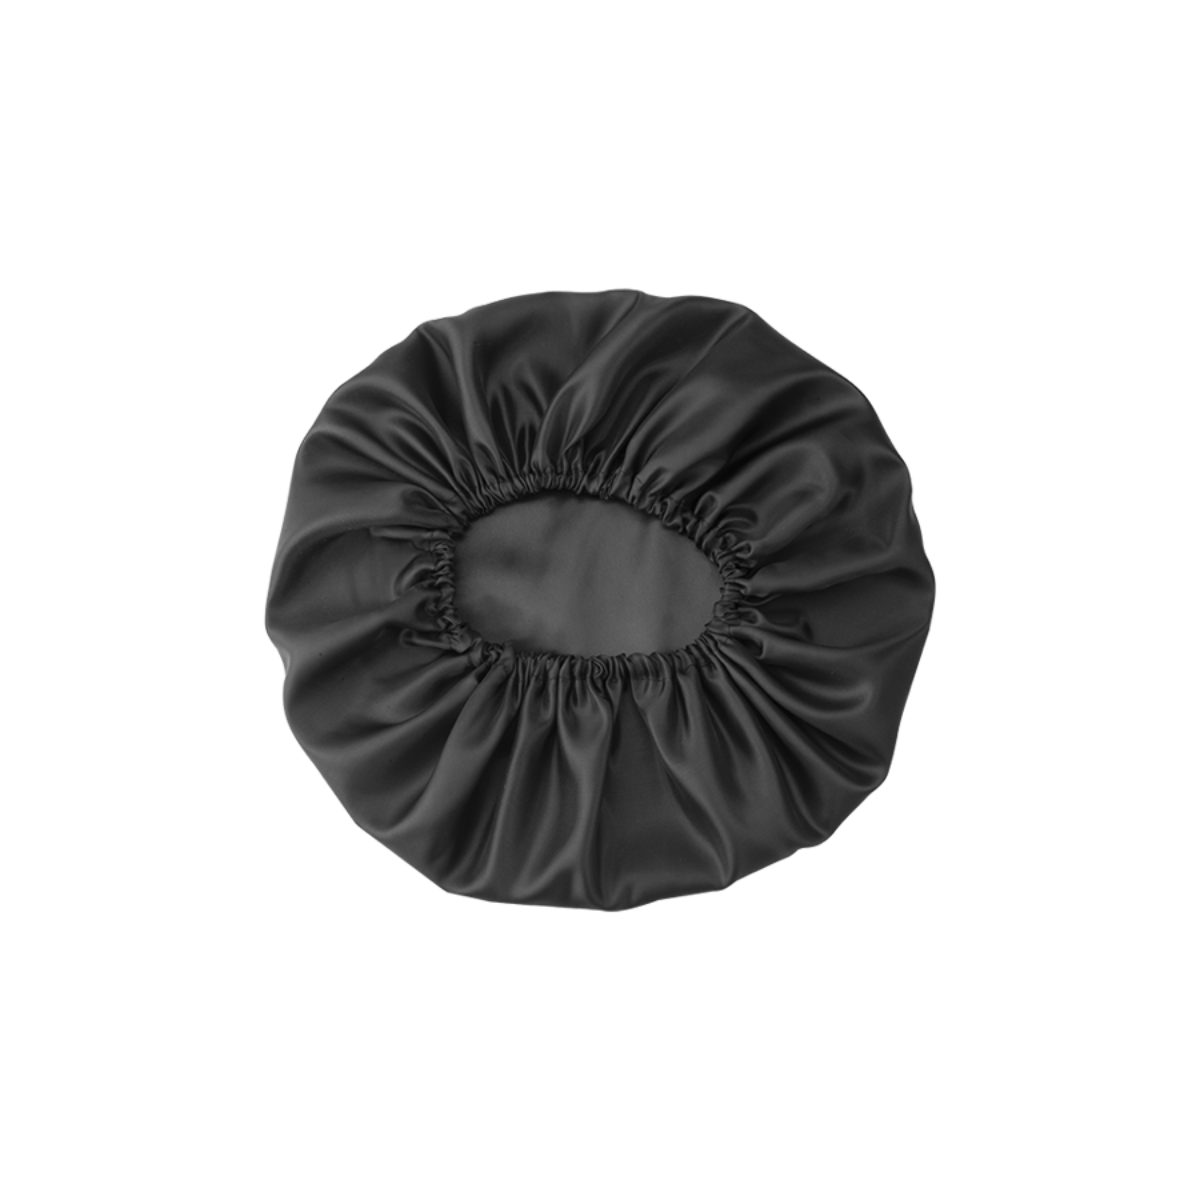 Dompel satin hair cap for curly, voluminous, or straight hair, it prevents frizz, dryness, knots and hair breakage when sleep. Model 392 - depilcompany